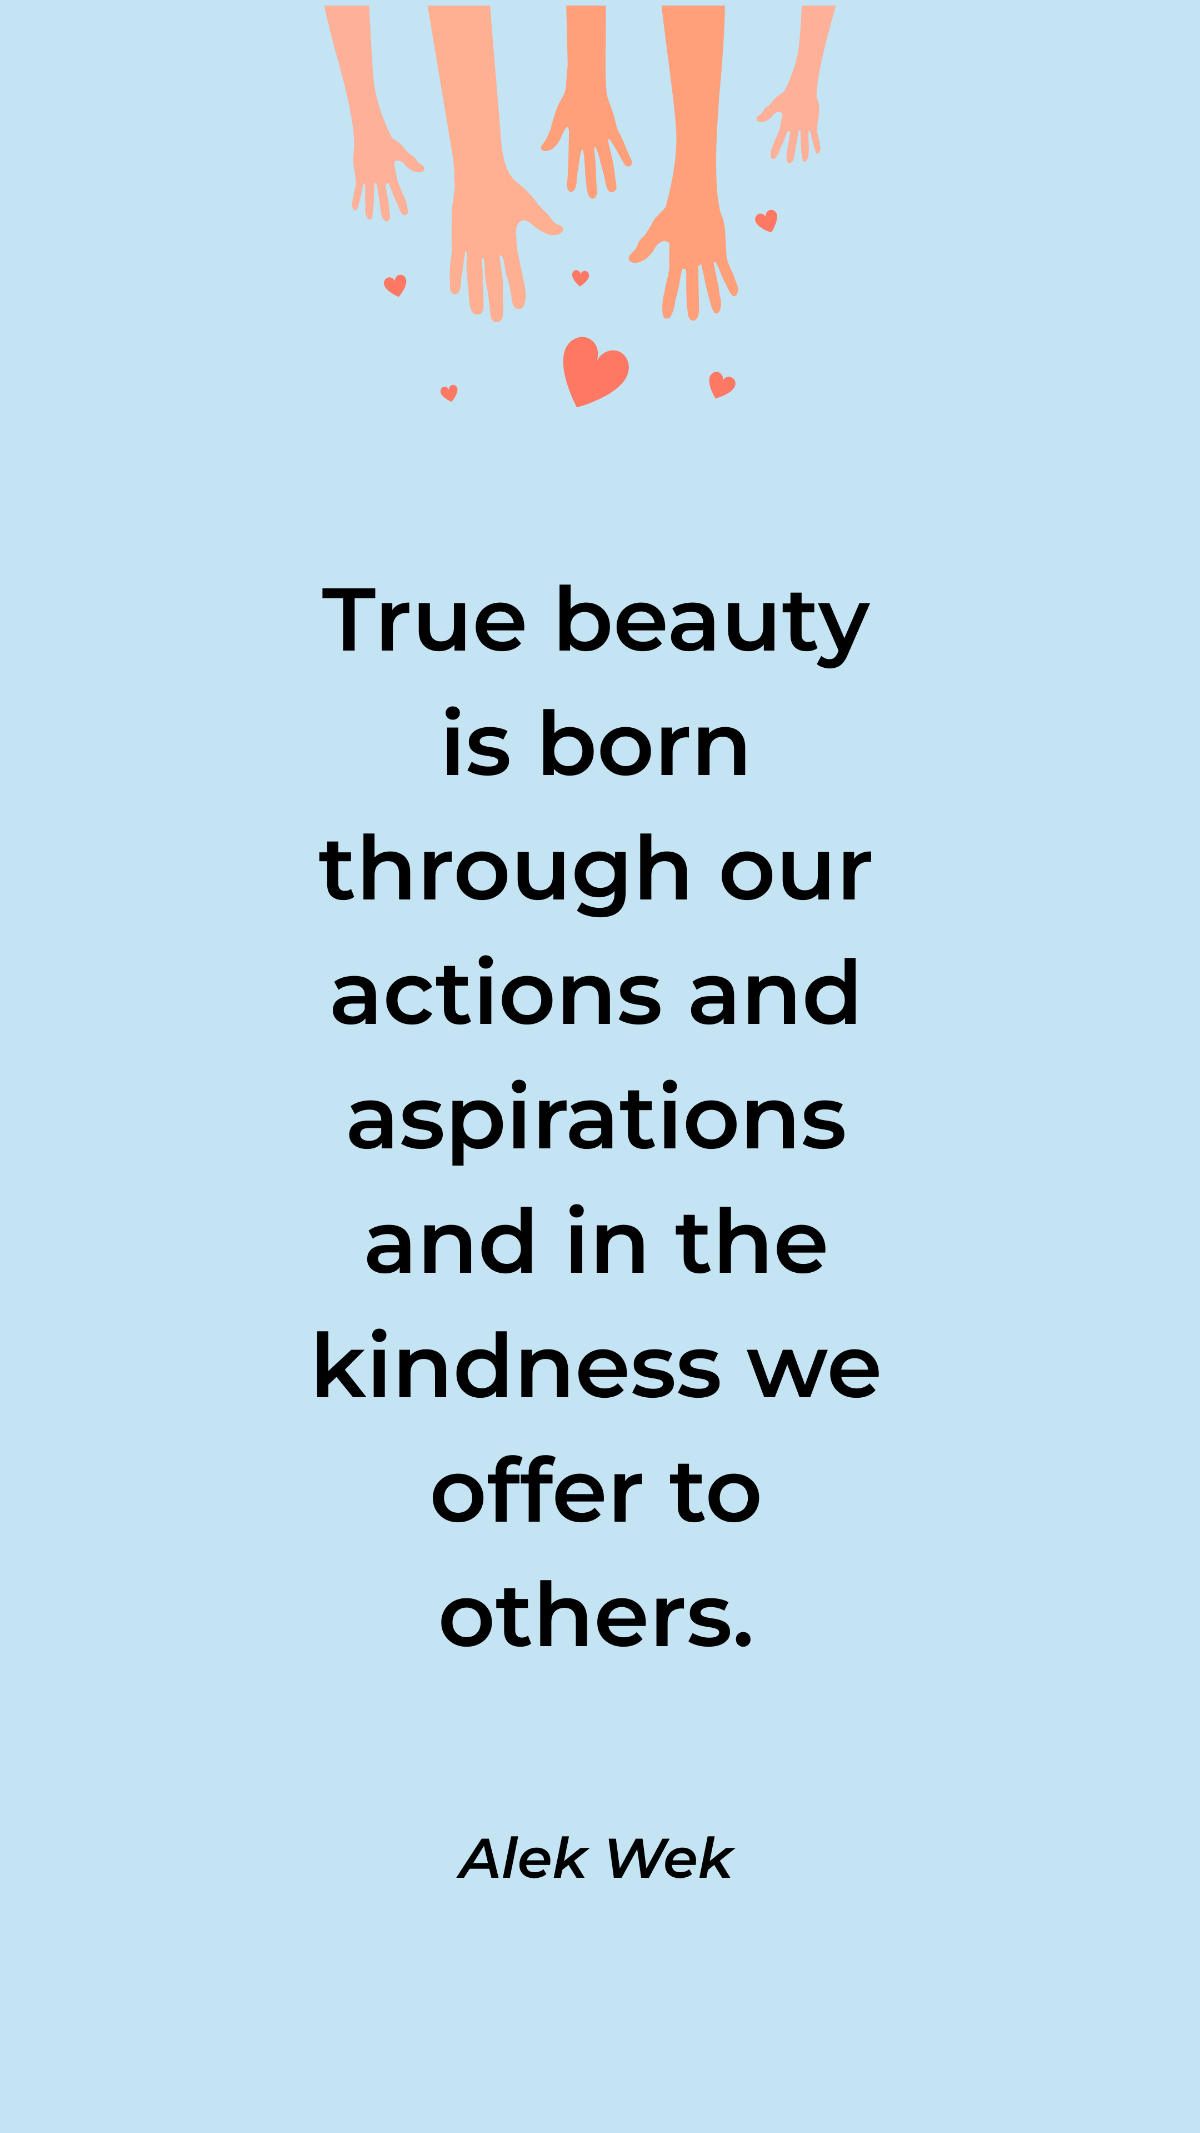 Alek Wek - True beauty is born through our actions and aspirations and in the kindness we offer to others.